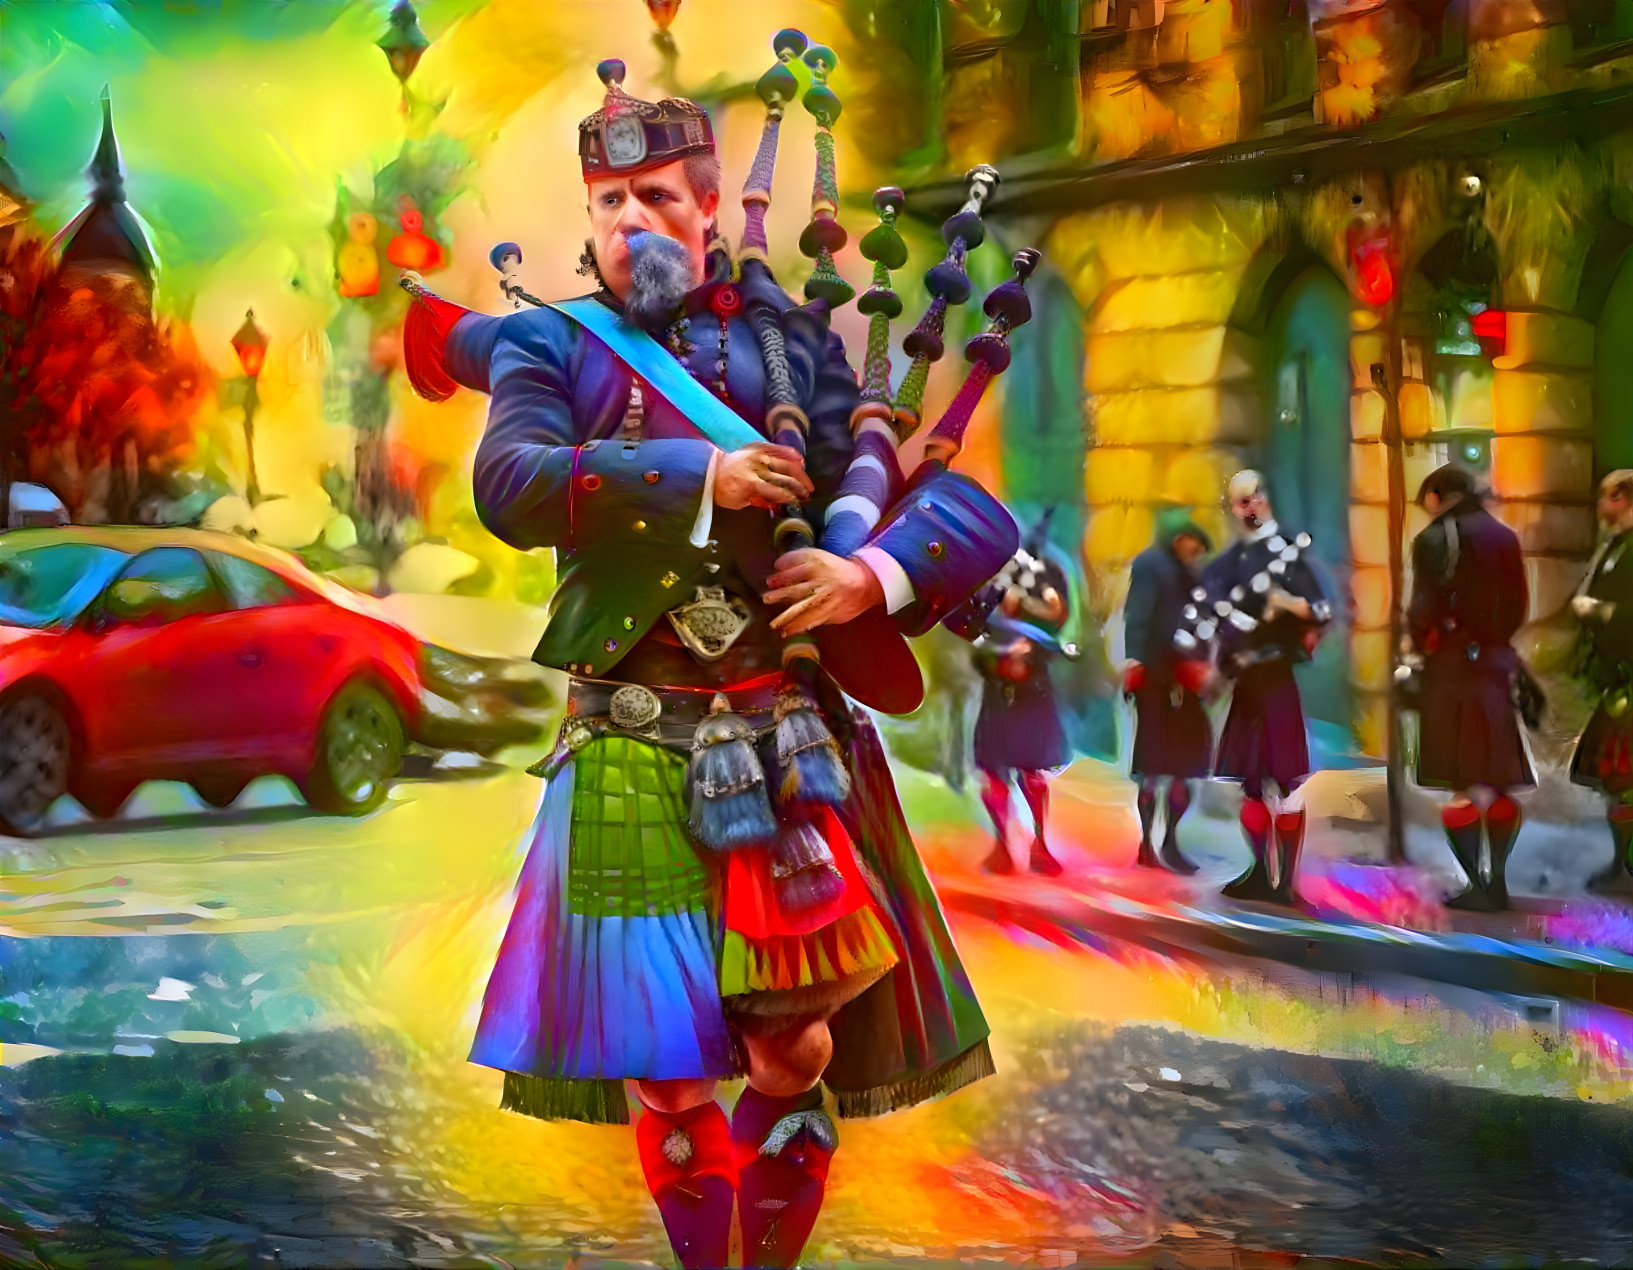 Piper with many pipes